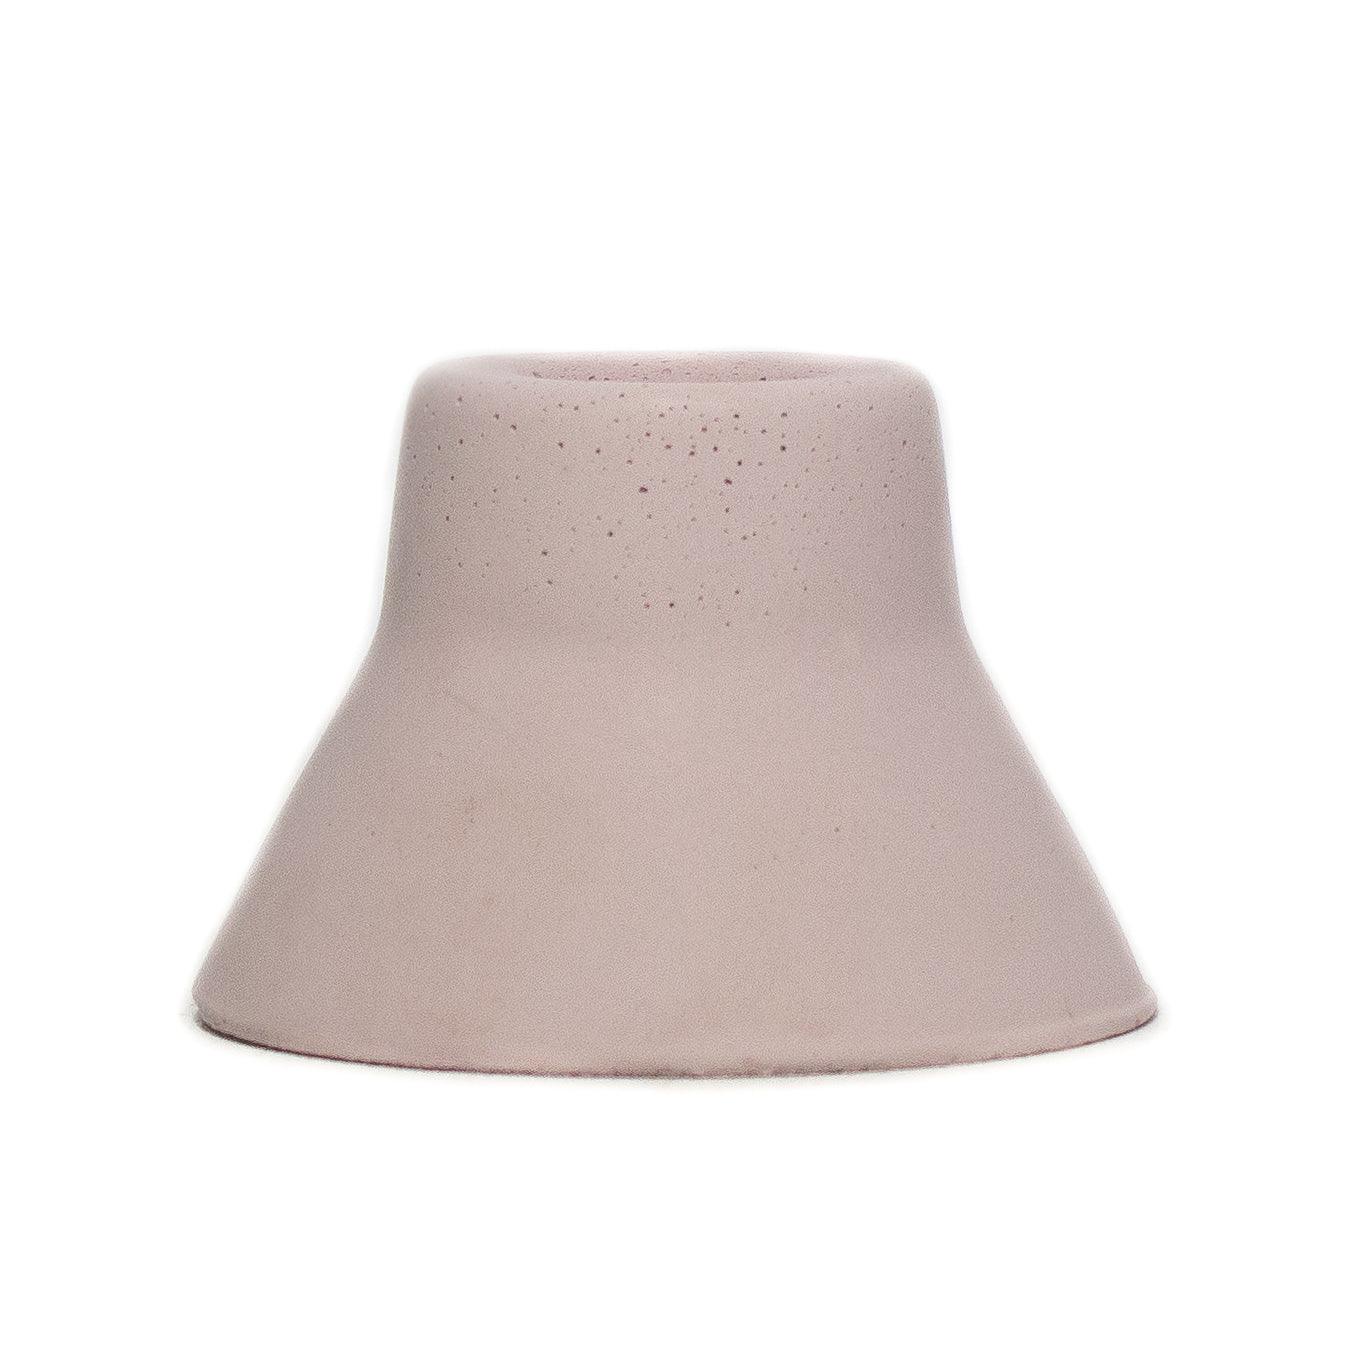 Soft pink concrete taper candle holder. 3" base narrows to about an 1" at the top and fits a standard Bluecorn Beeswax taper candle.